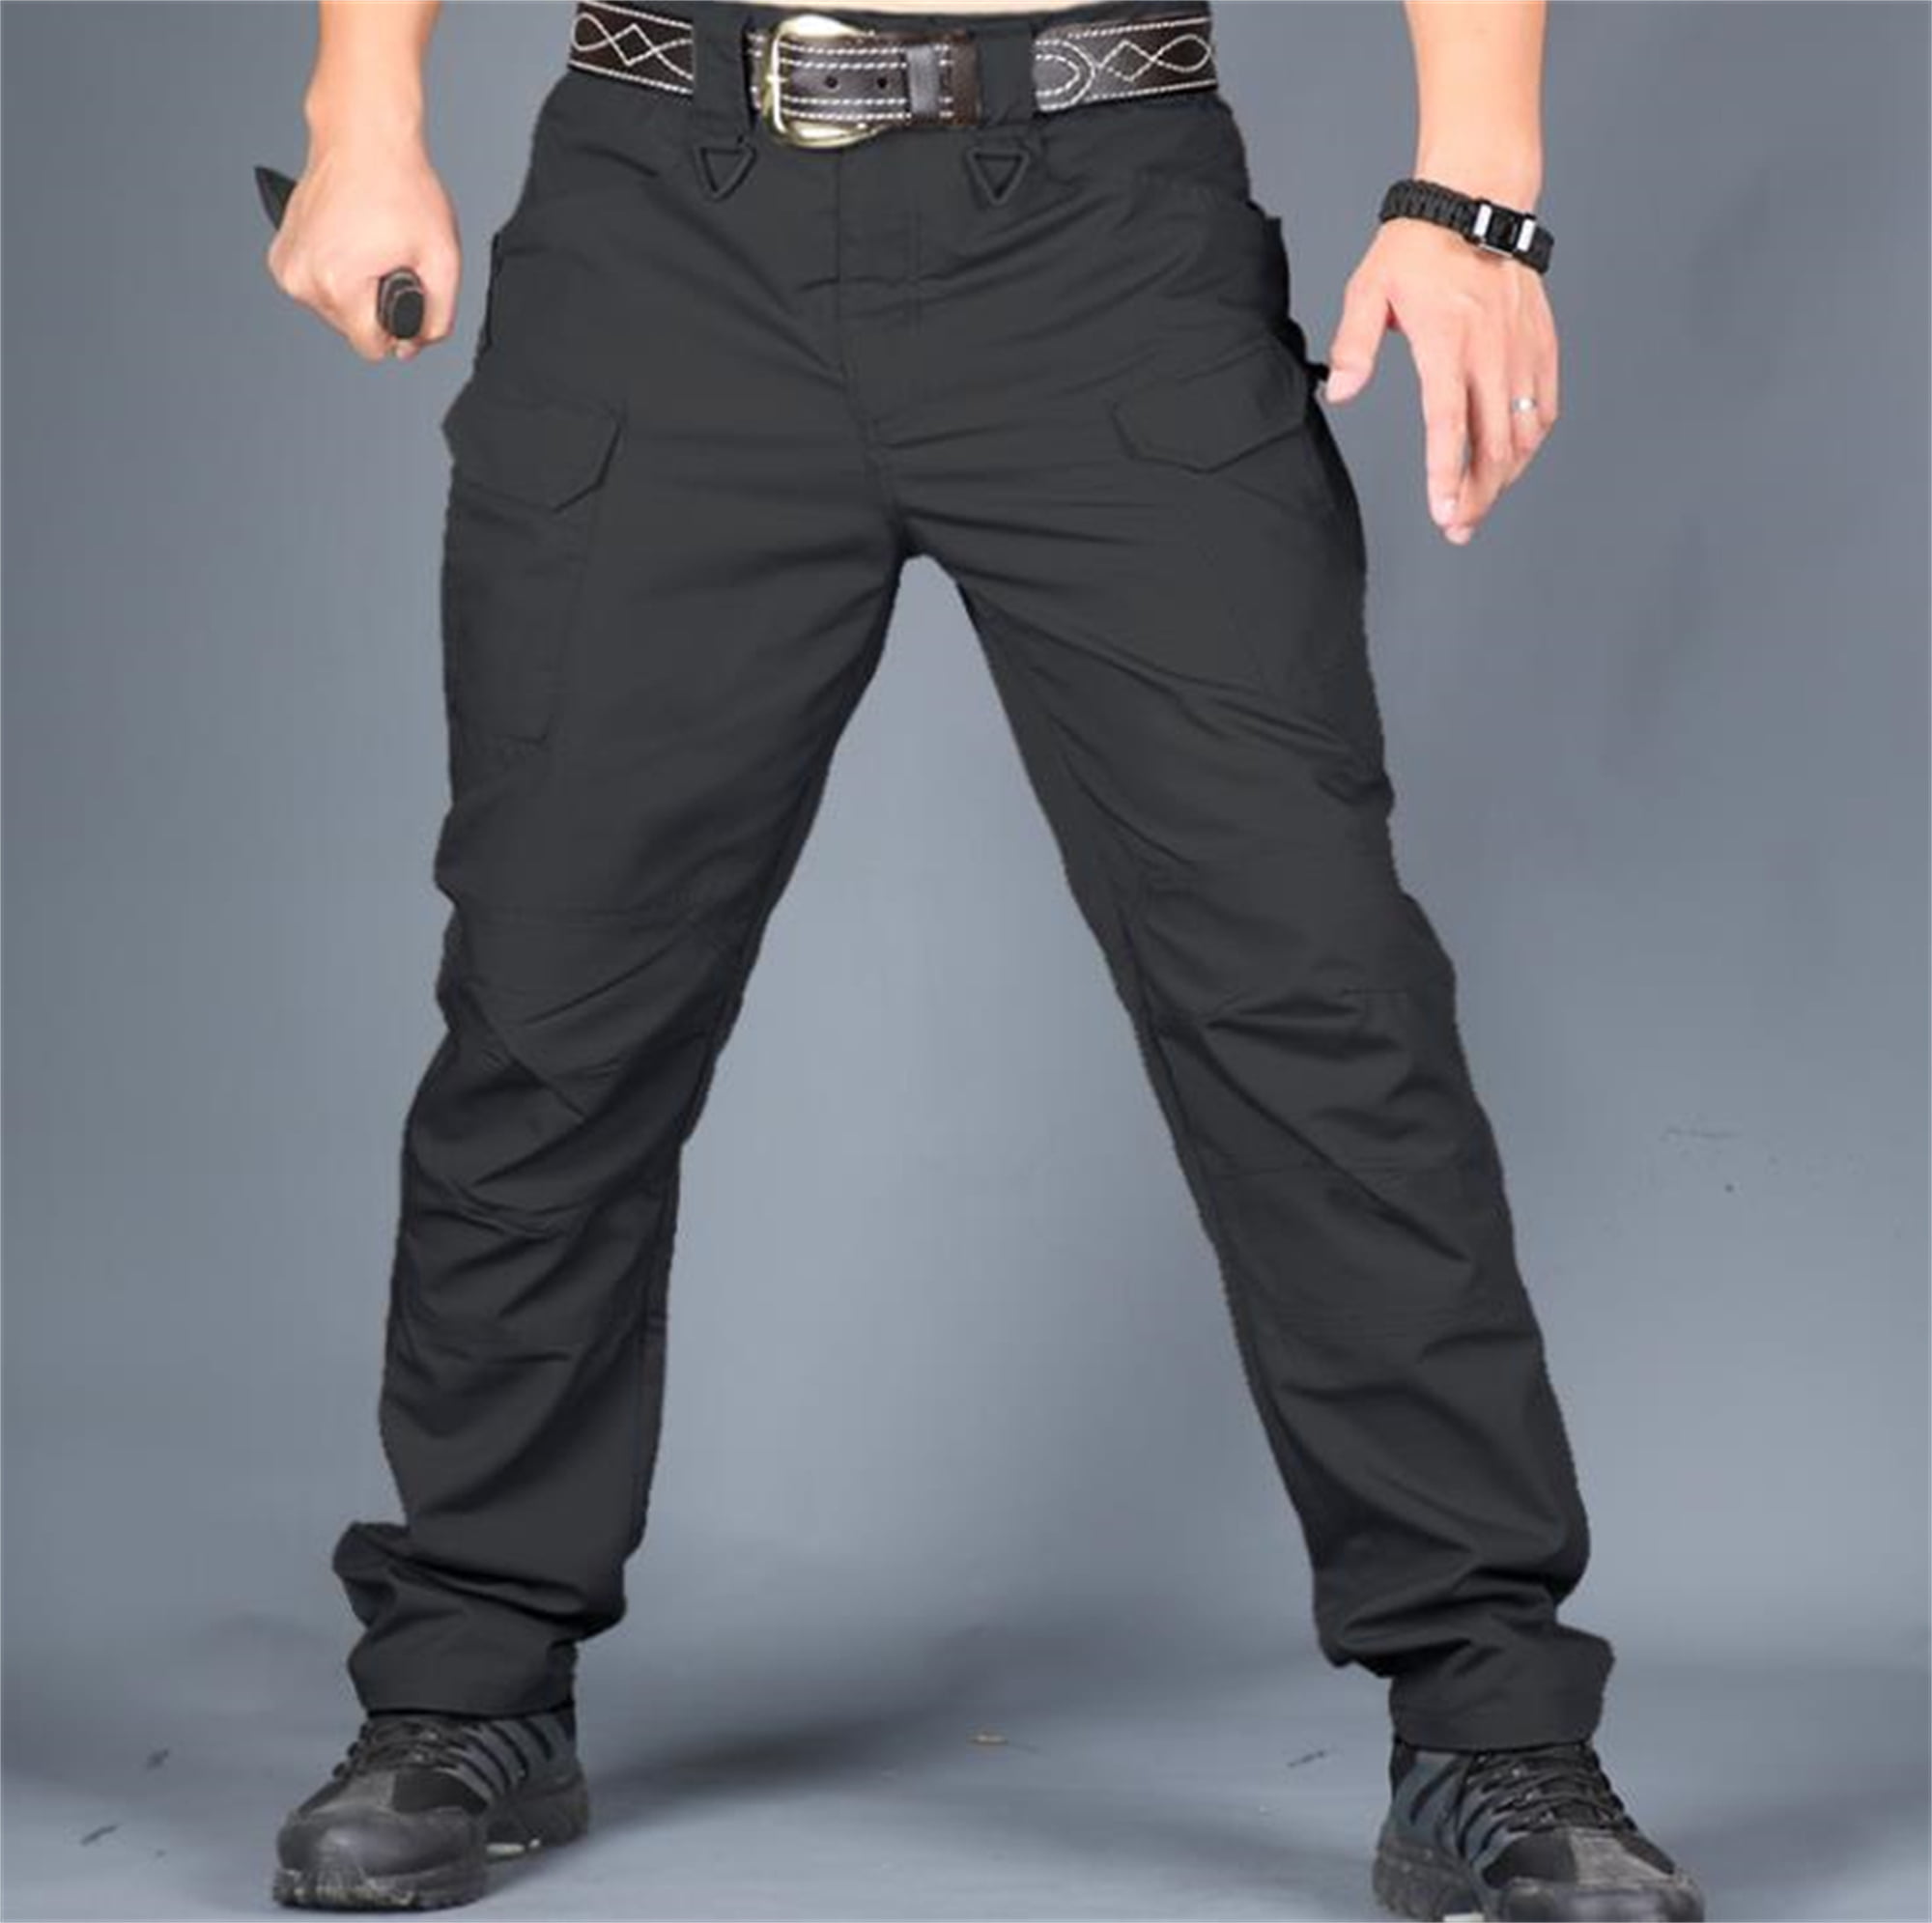 2 Pairs Work Trousers Mens Cargo Combat Style Heavy Duty Black Cerber 